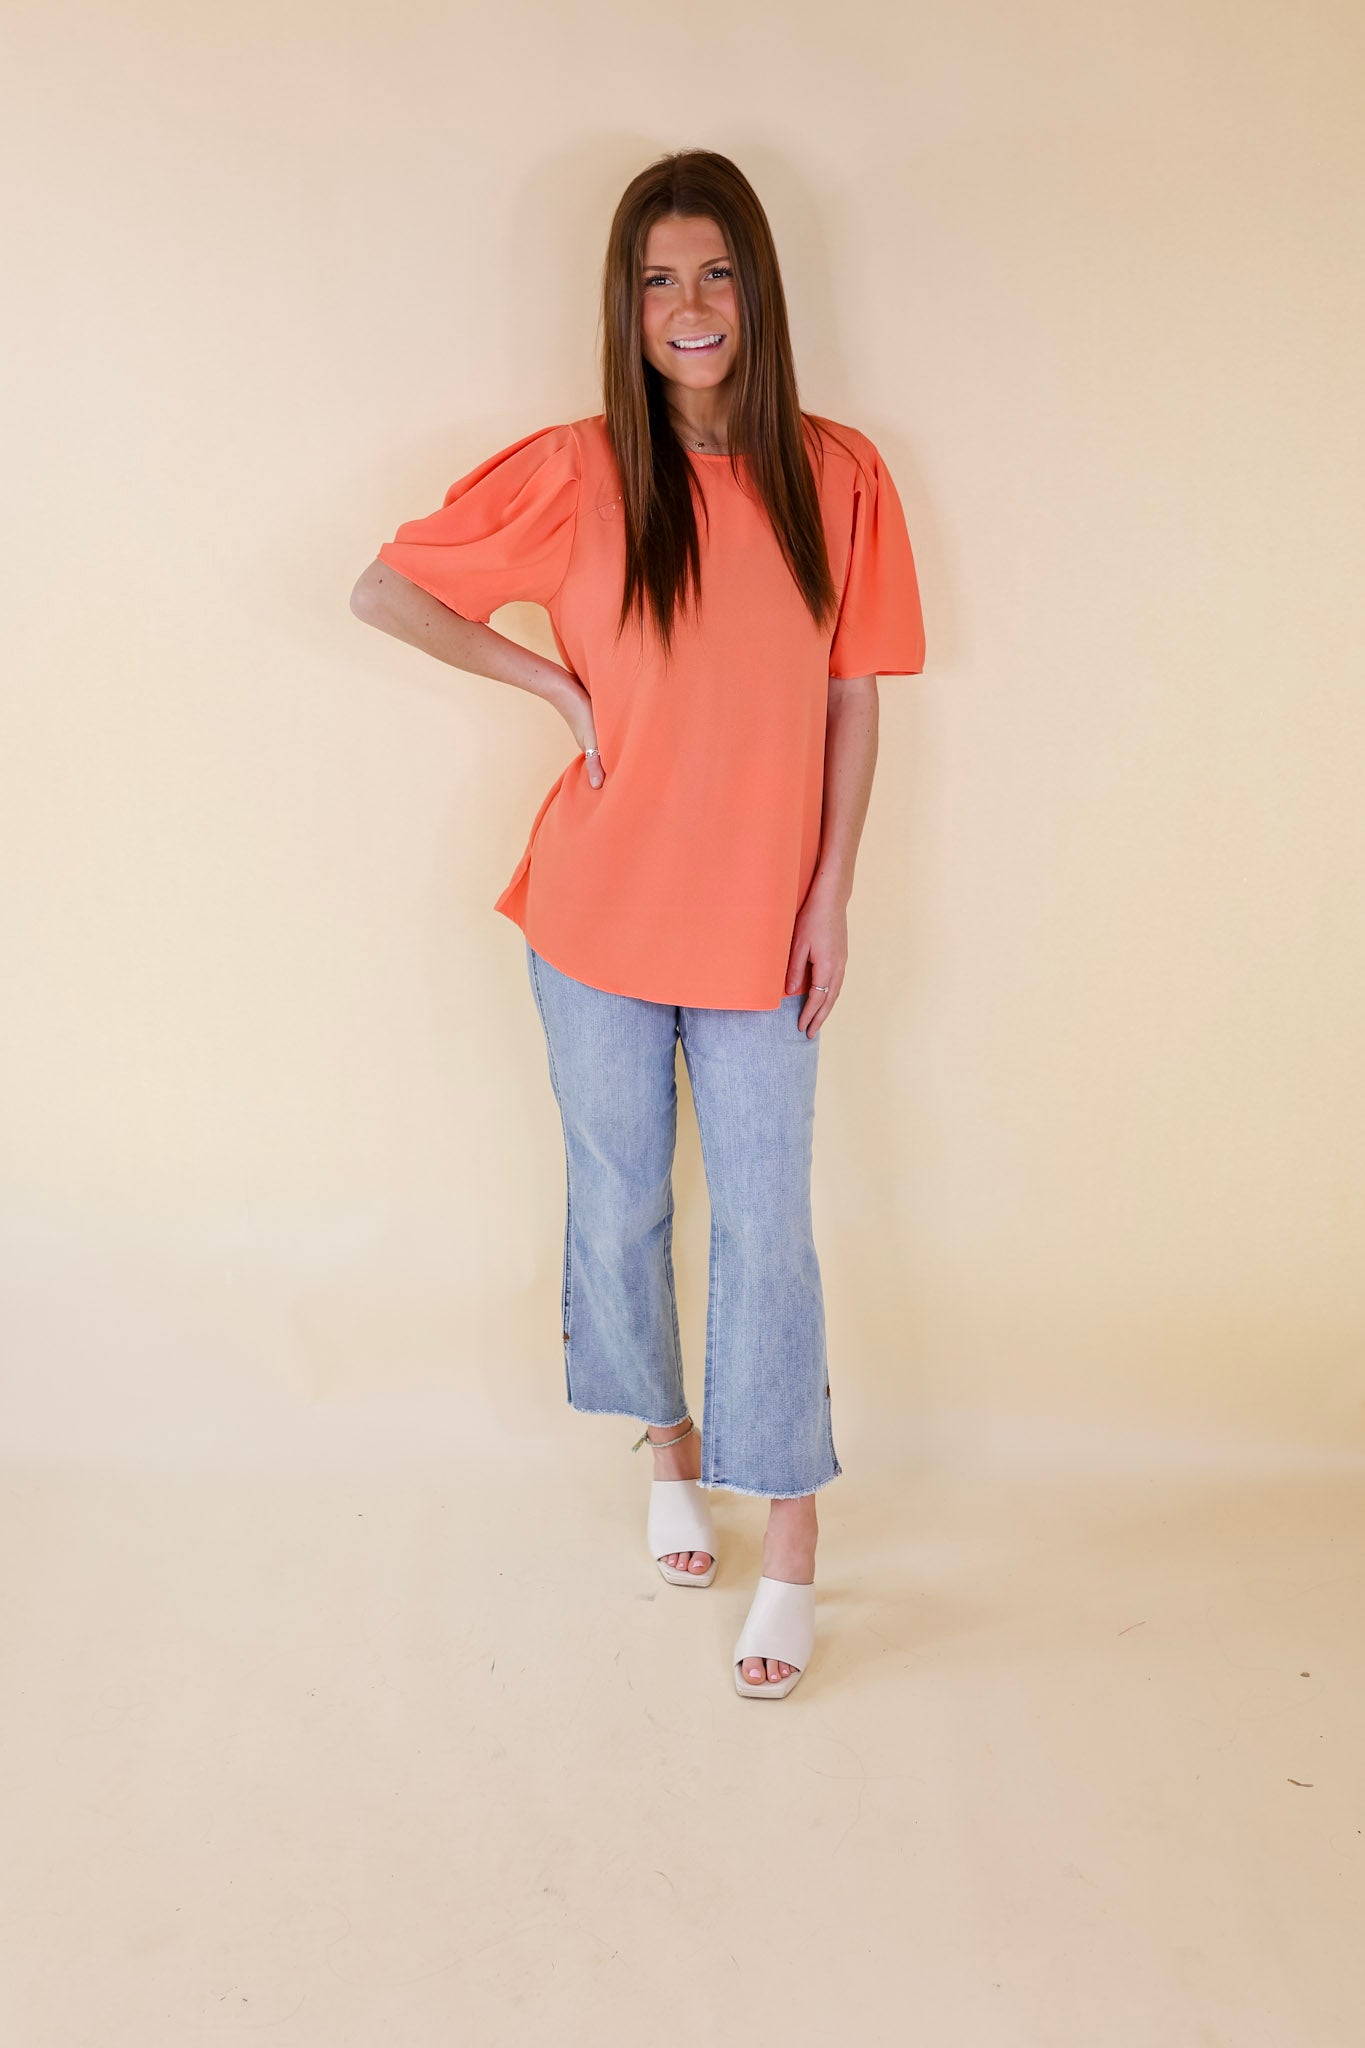 Share The Love Pleated Short Sleeve Top in Coral Orange - Giddy Up Glamour Boutique